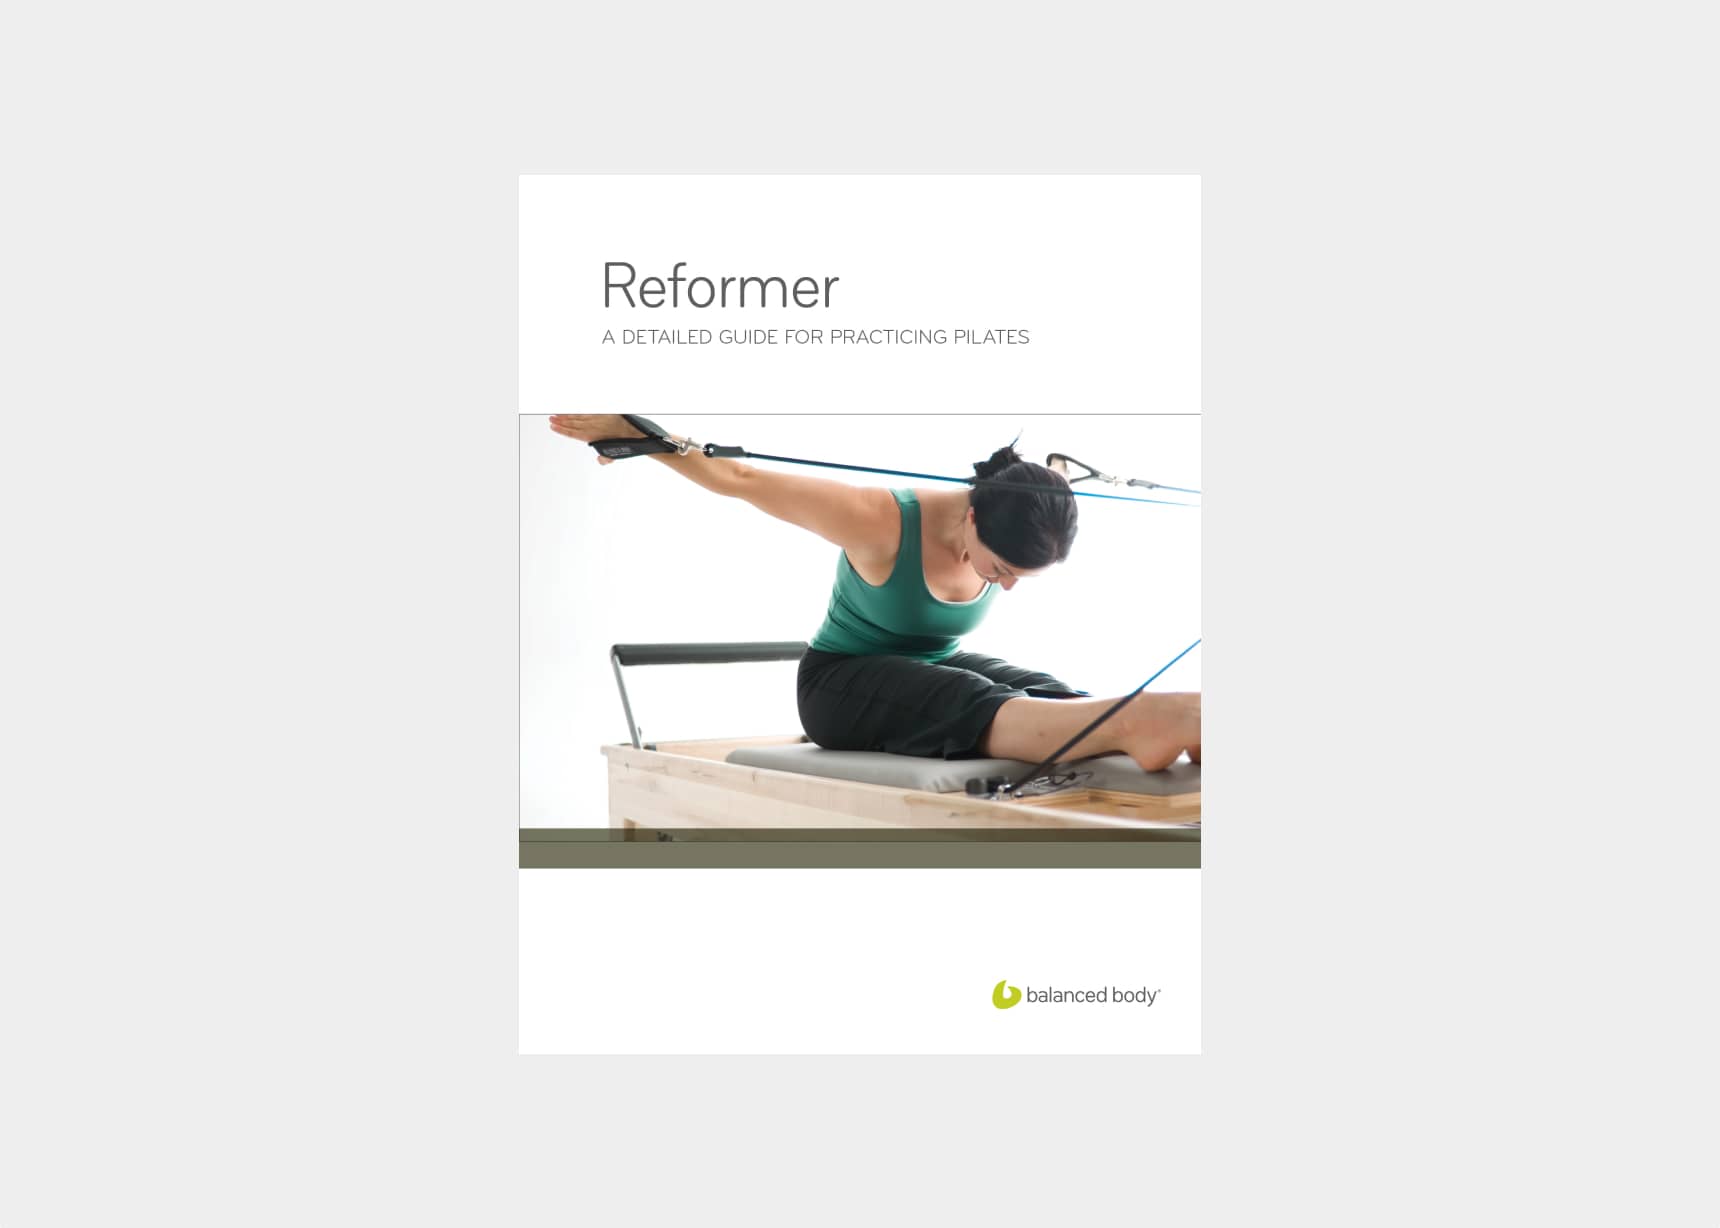 Reformer. a detailed guide for practicing pilates